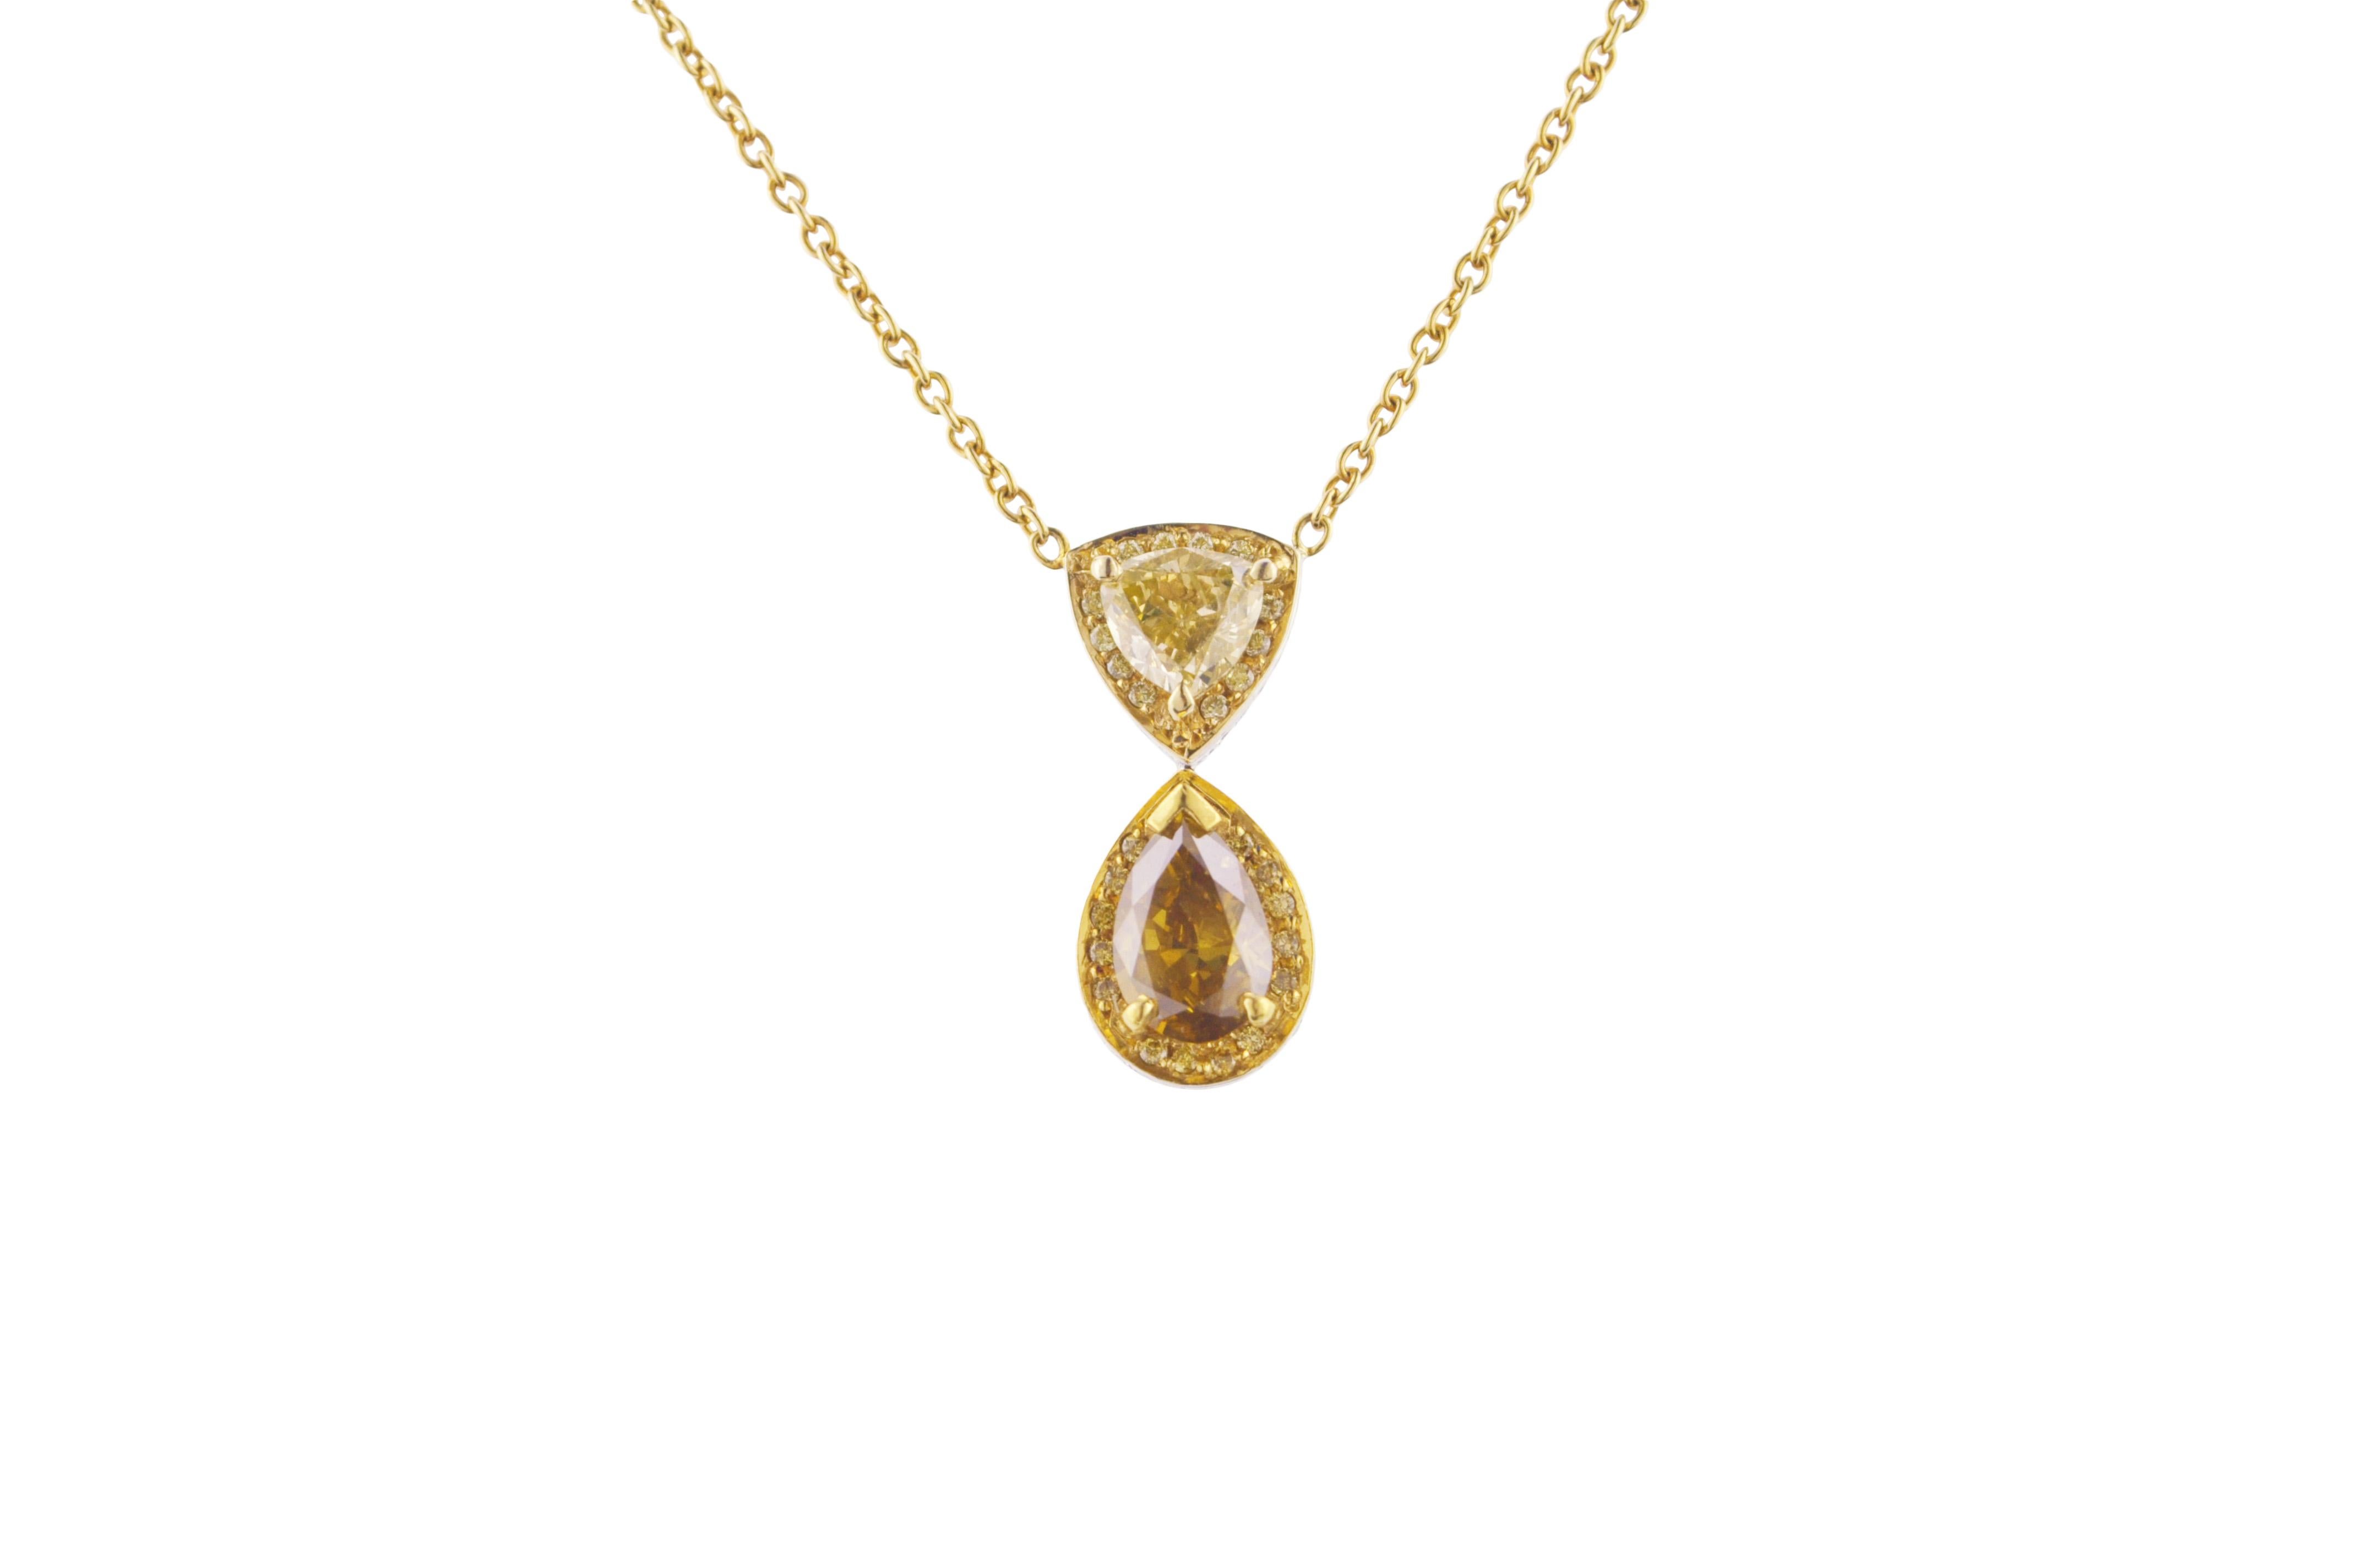 18K yellow gold necklace featuring a fancy greenish yellow diamond, one fancy orangy brown diamond and adorned with white pave diamonds. 

Diamonds:
1 Fancy Greenish Yellow Diamond: 1.20 carats
1 Fancy Orangy Brown Diamond: 1.78 carats